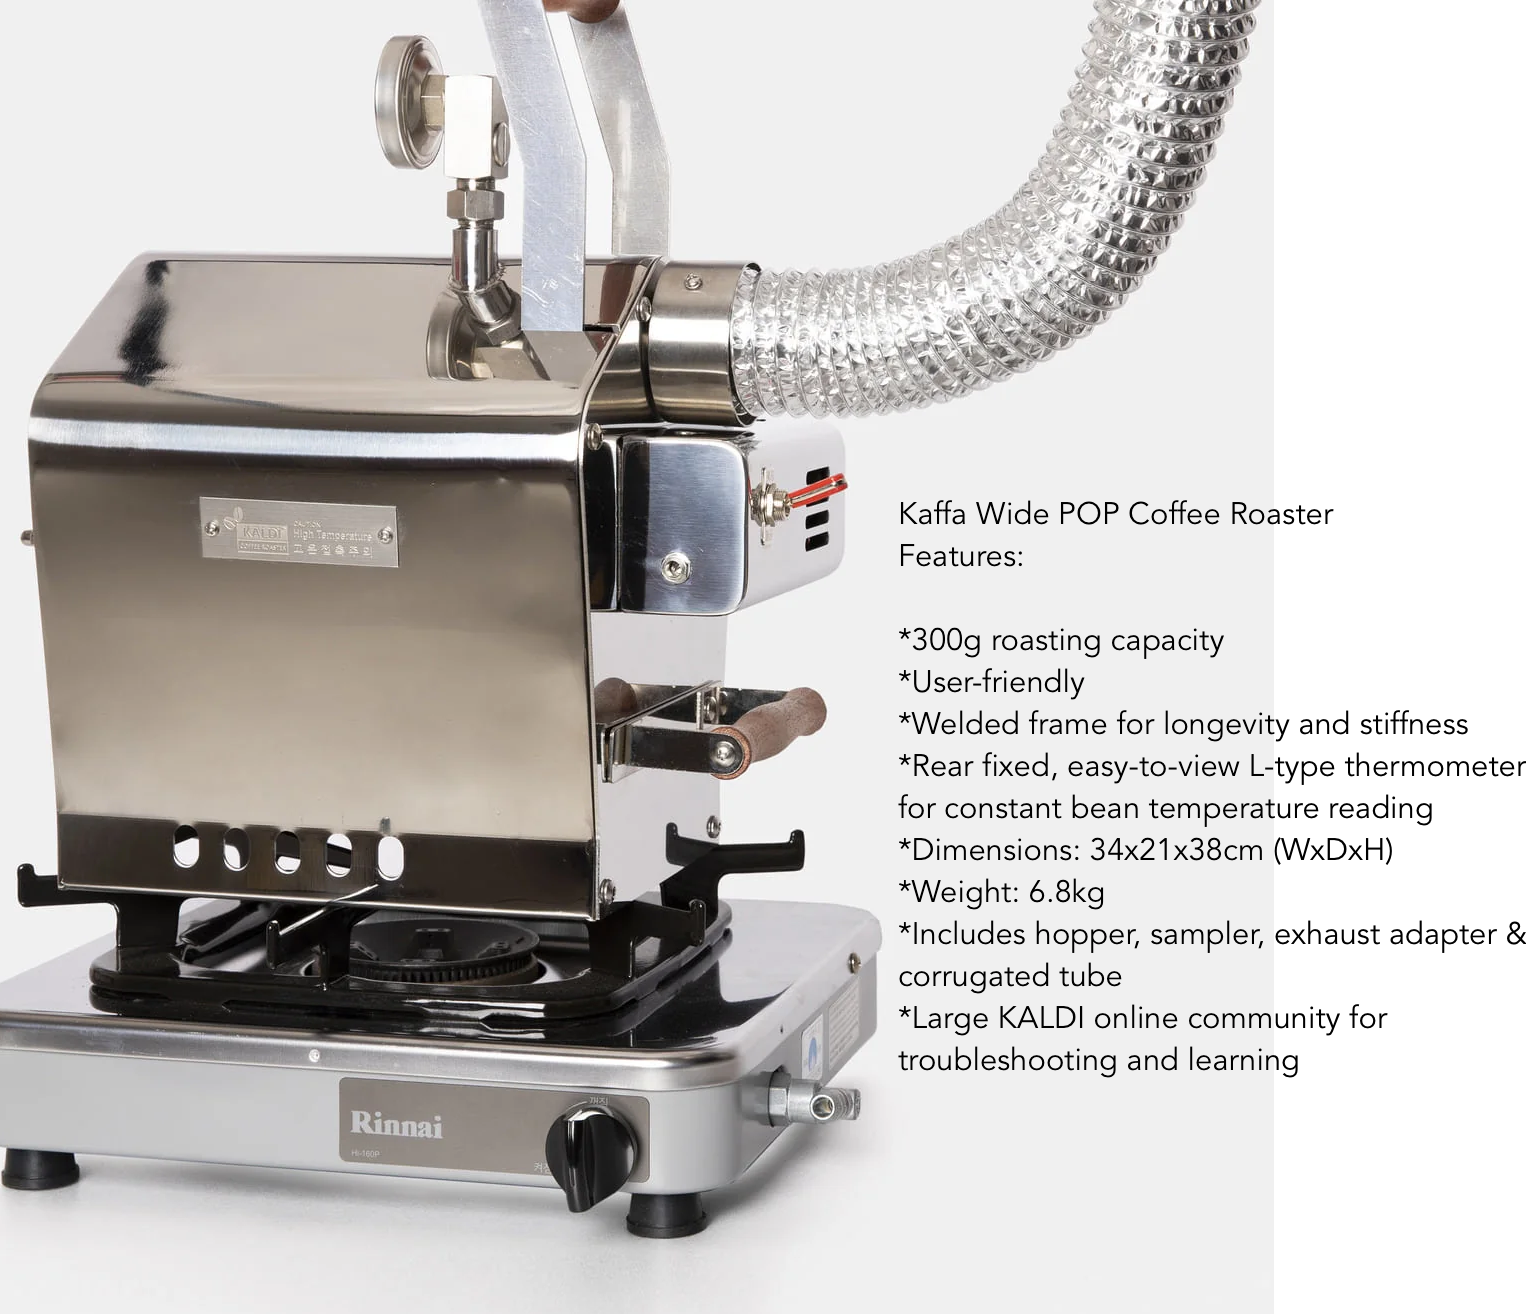 Features and specs of the Kaffa Wide POP Coffee Roaster